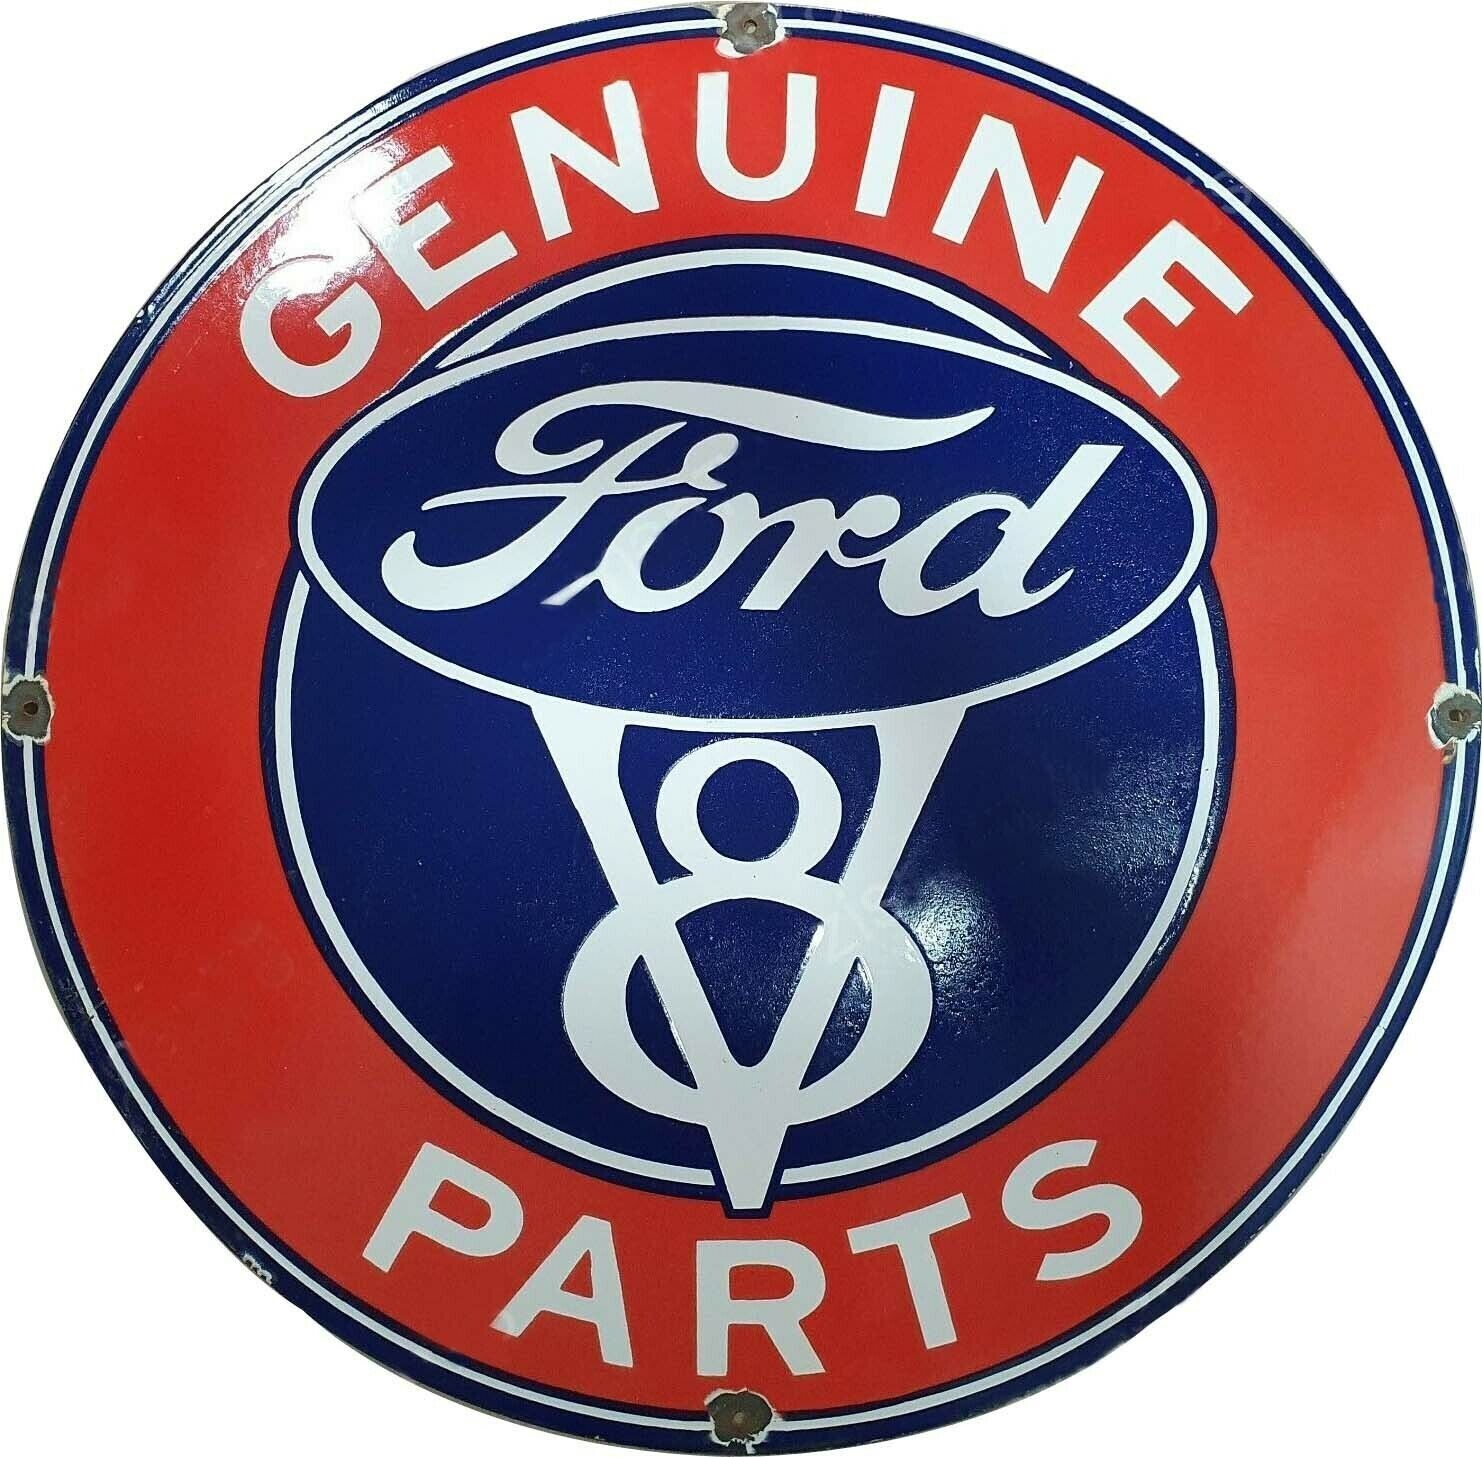 PORCELIAN FORD V8 ENAMEL SIGN SIZE 42X42 INCHES DOUBLE SIDED